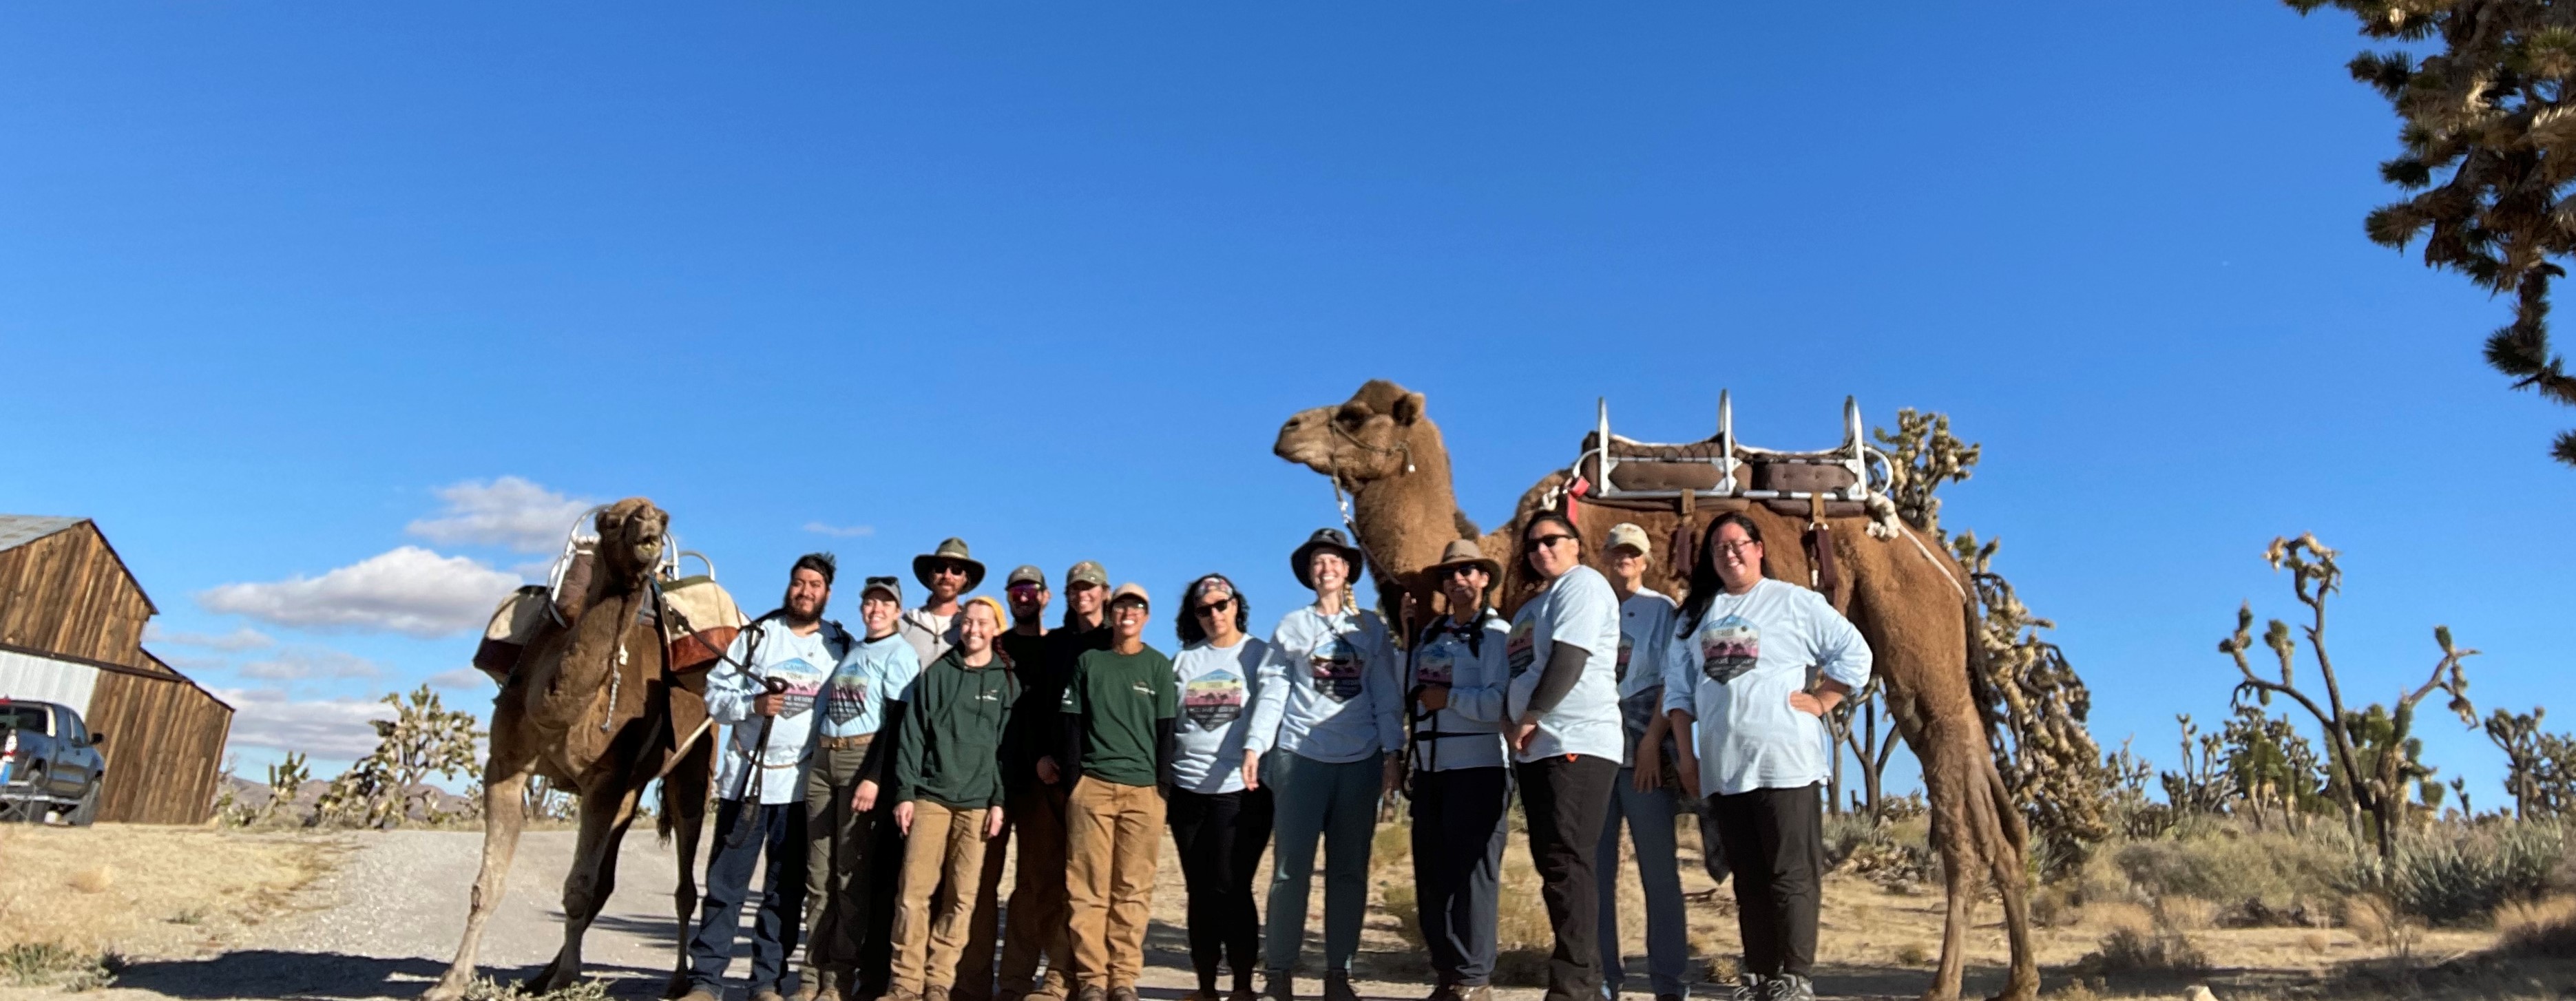 Joshua Tree National Park is employing camels to help save the